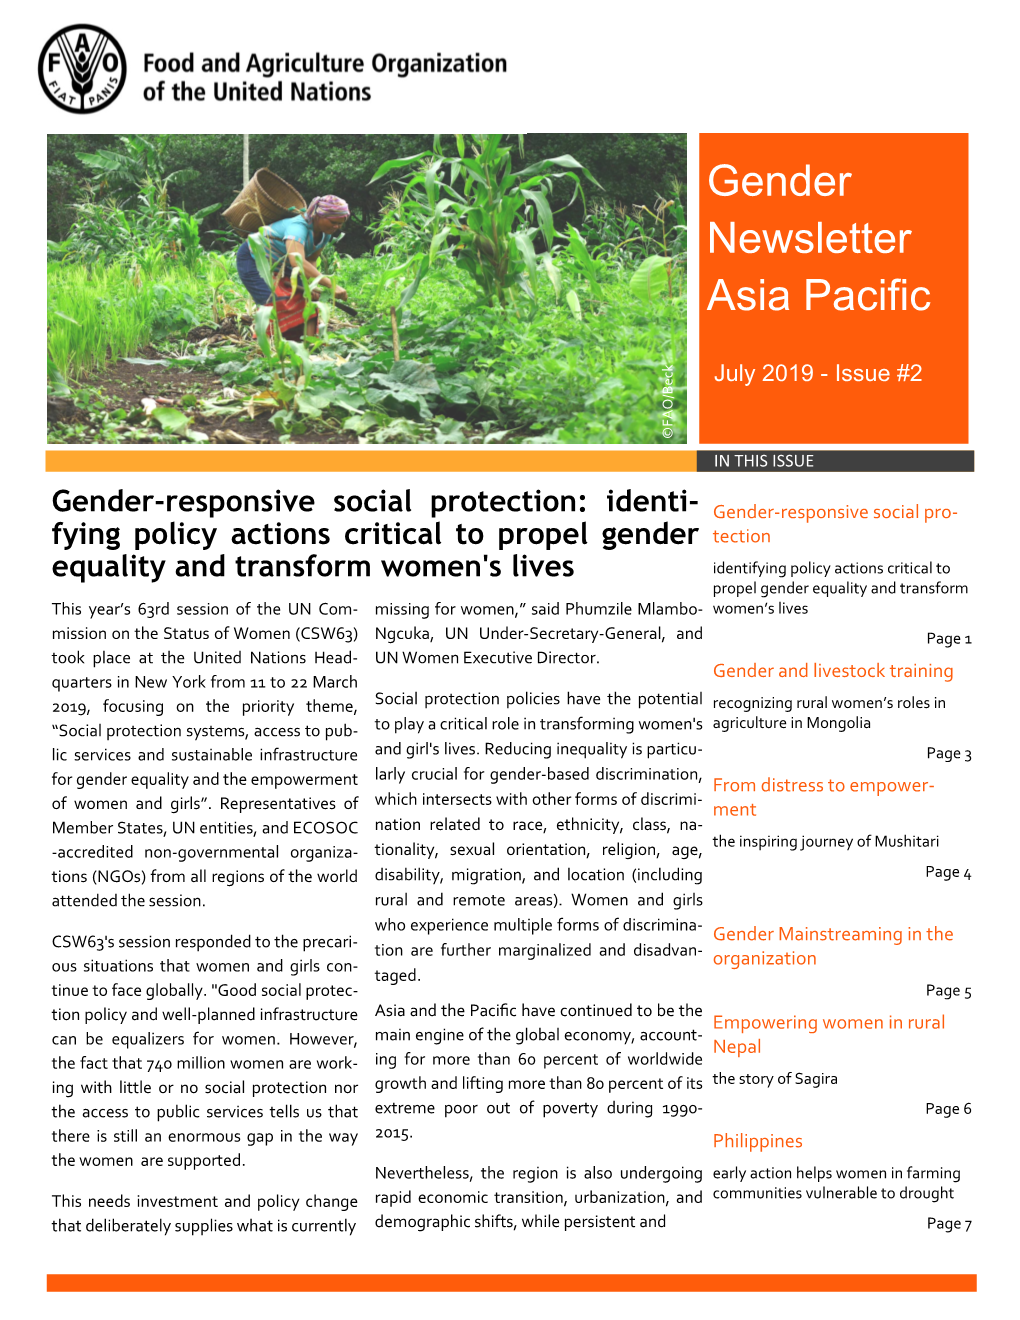 Gender Newsletter Asia Pacific